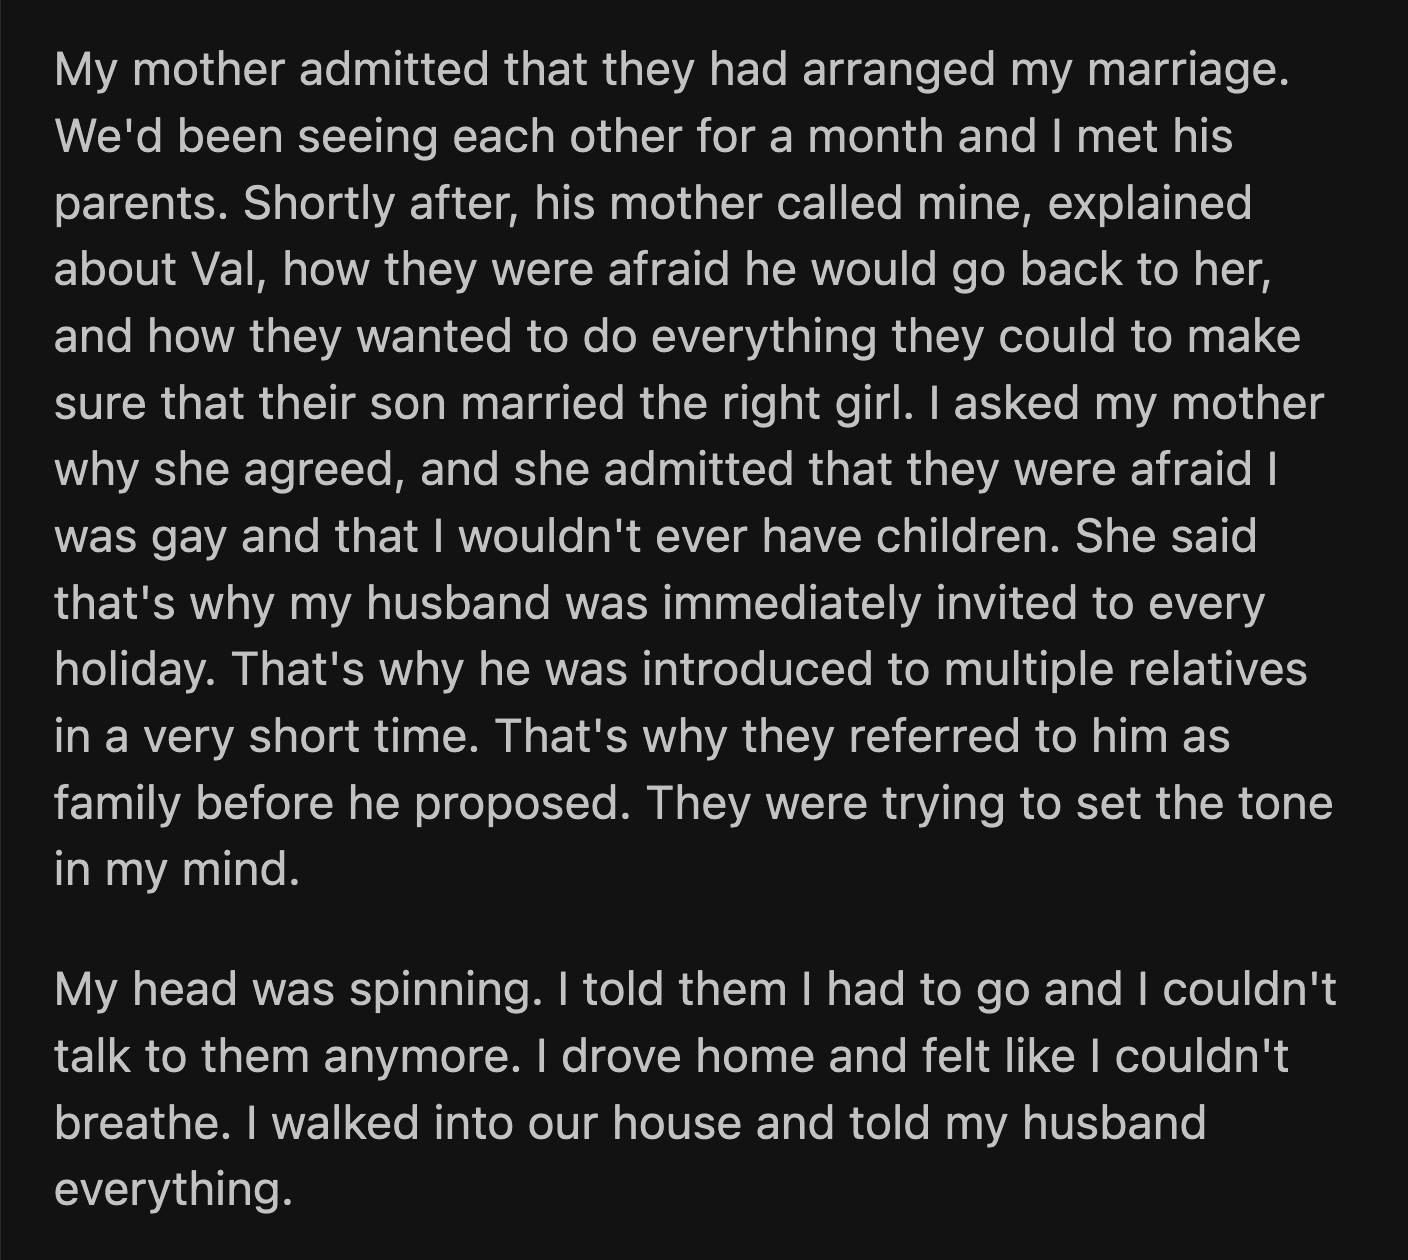 OP's head reeled when her parents confessed to arranging her marriage with her husband because they feared she was gay and that she would never have kids.